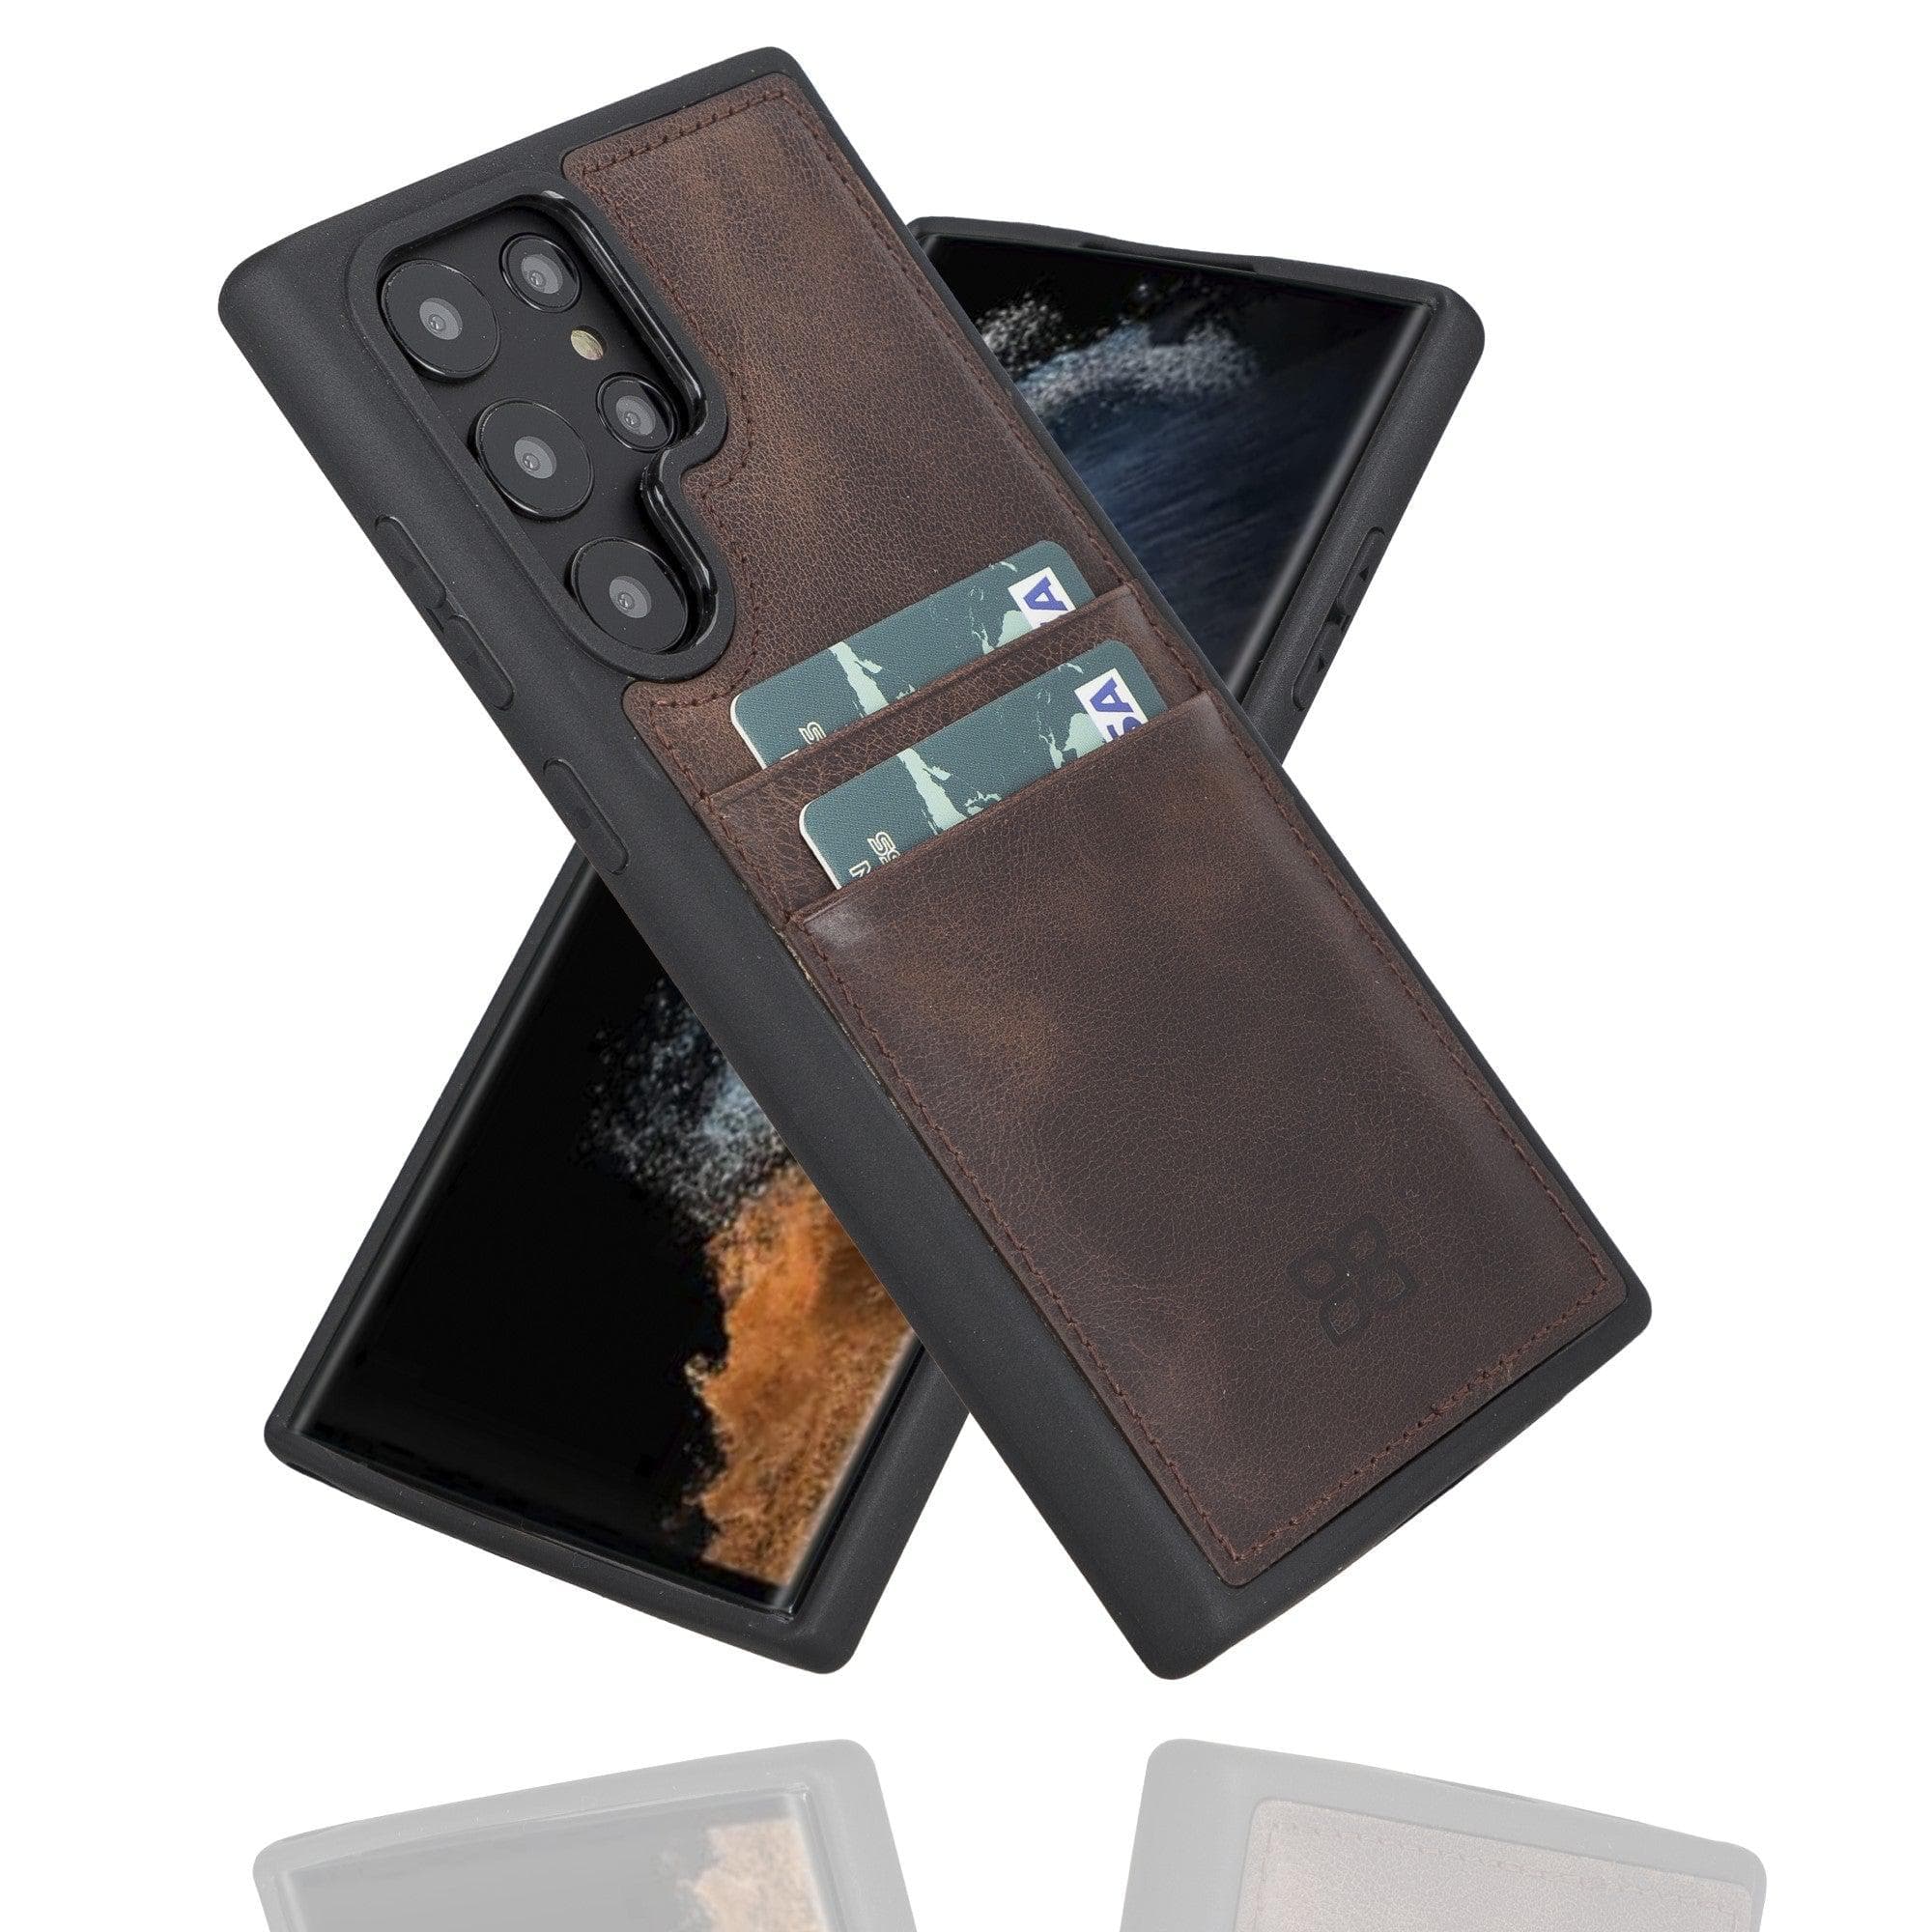 Samsung Galaxy S22 Series Genuine Leather Slim Back Cover Case with Card Holders Samsung Galaxy S22 Ultra / Dark Brown Bouletta